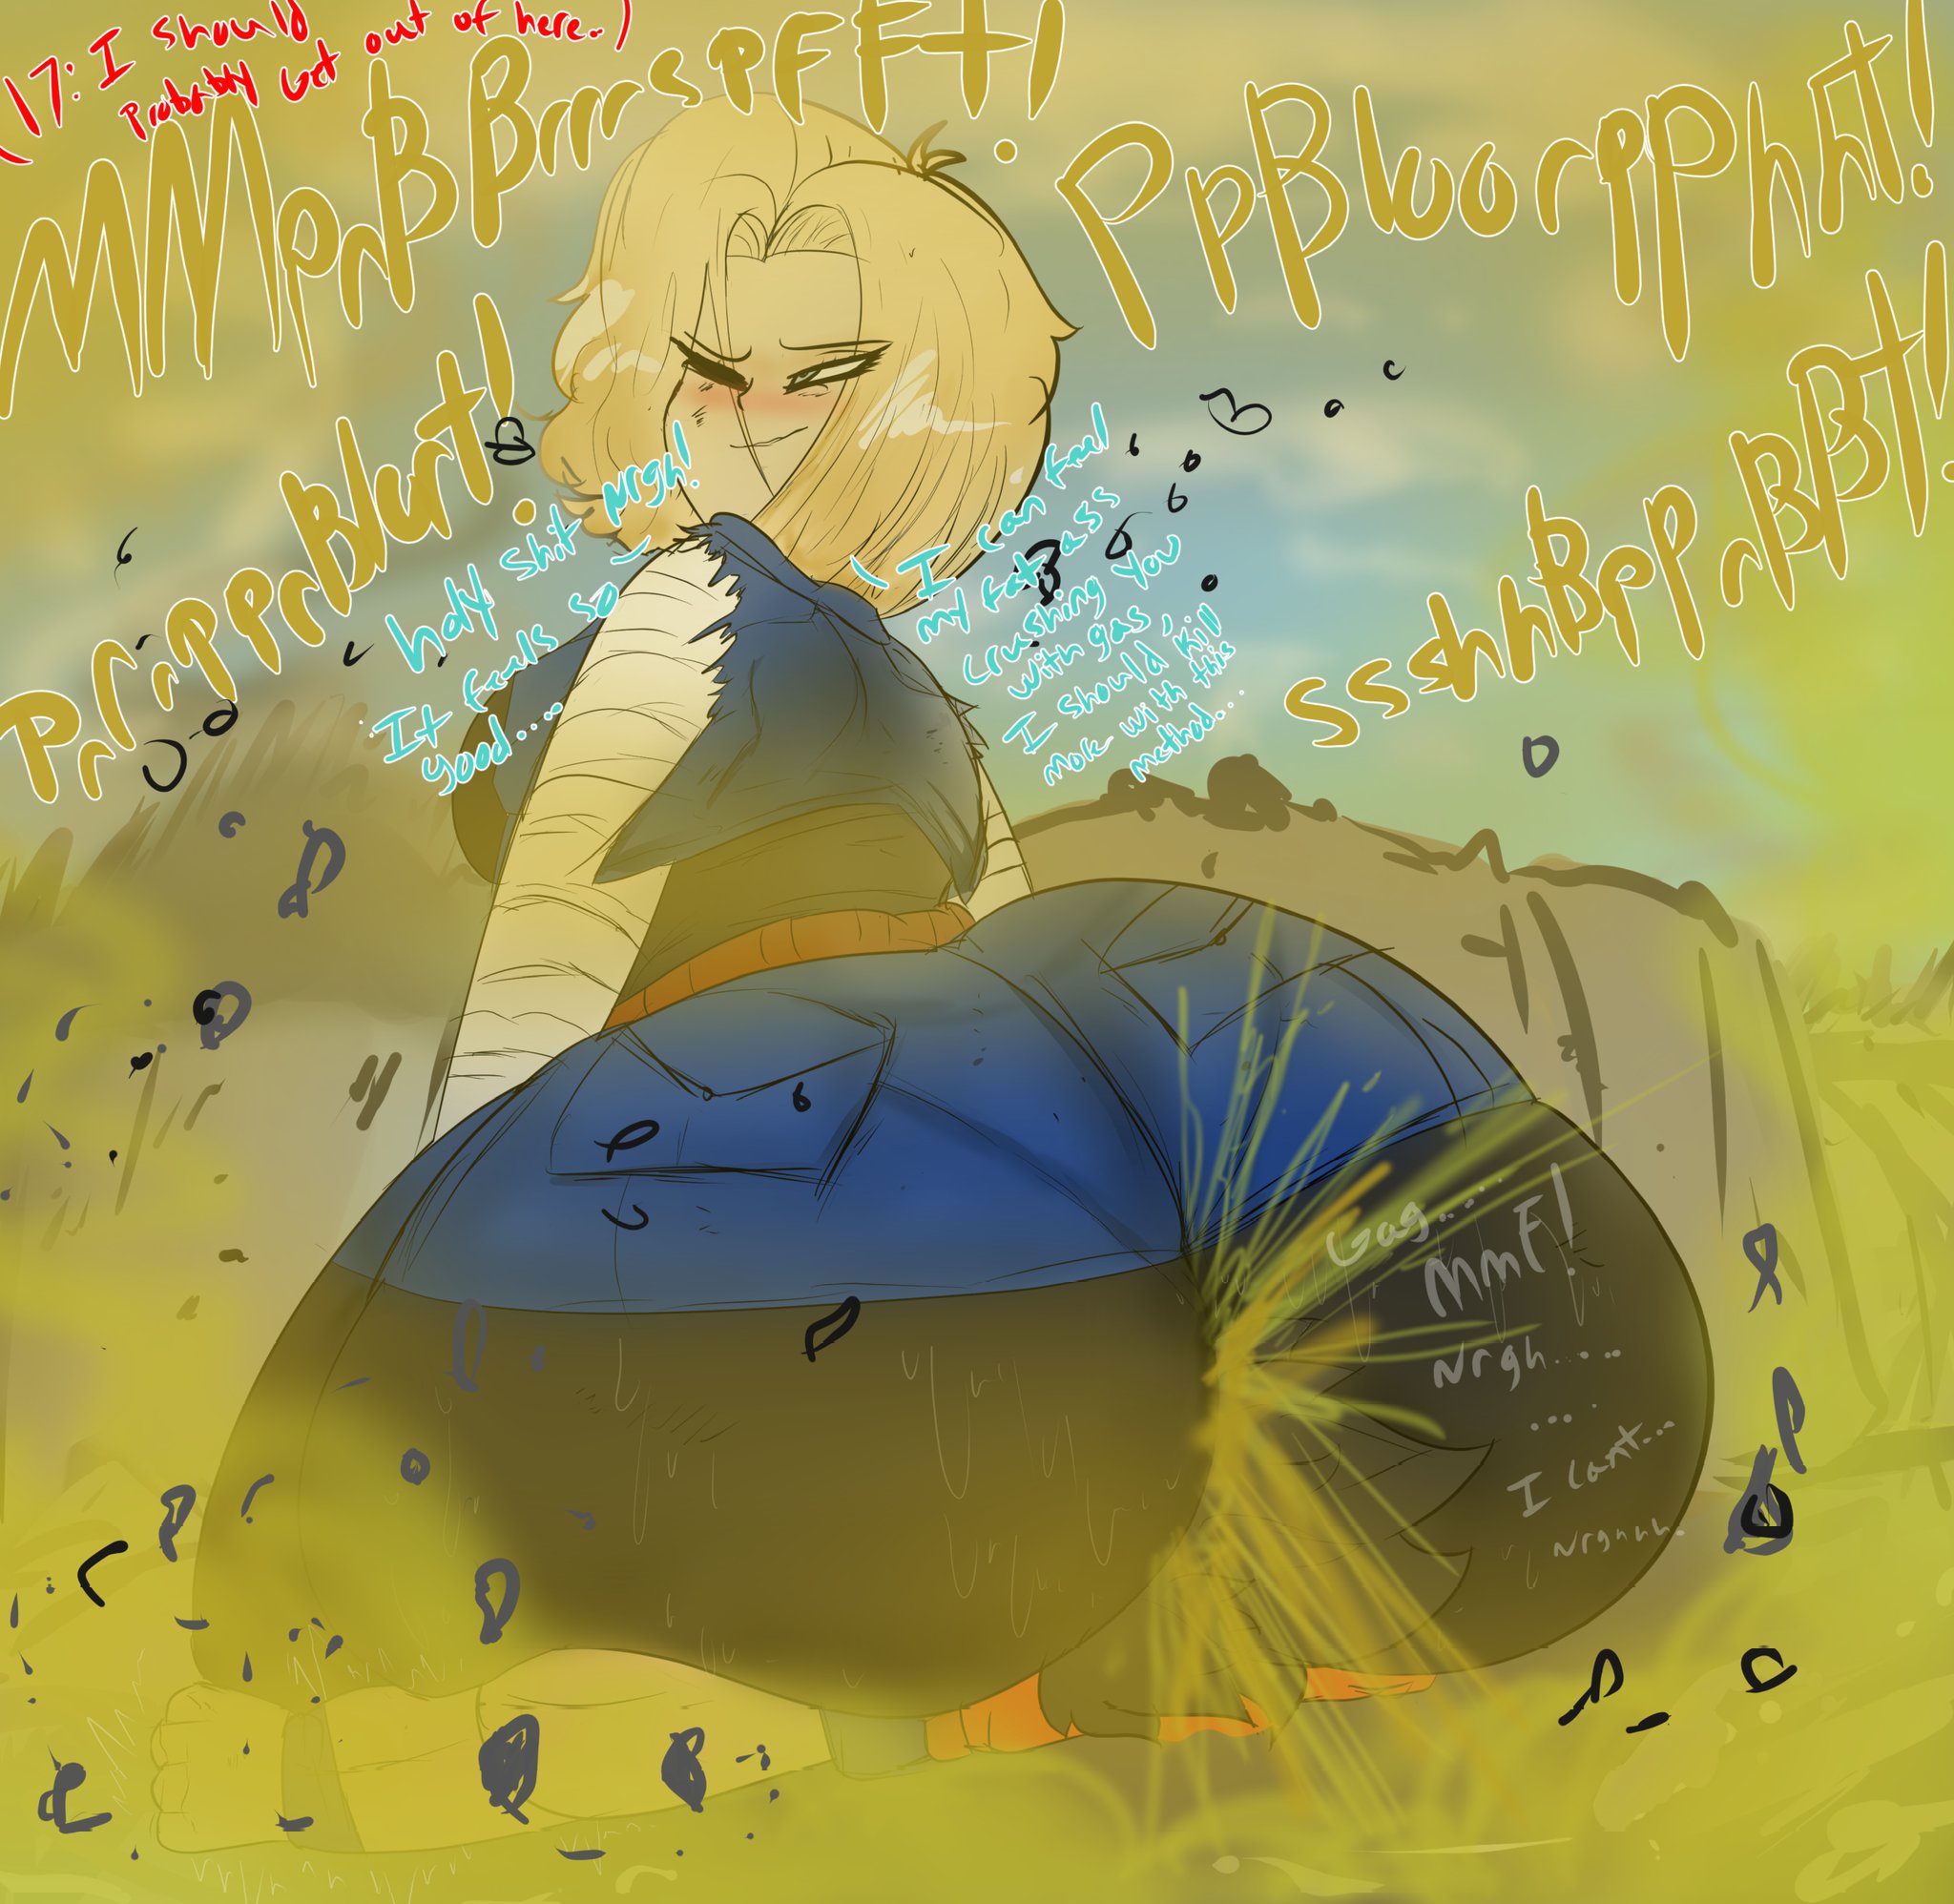 Android 18 farting